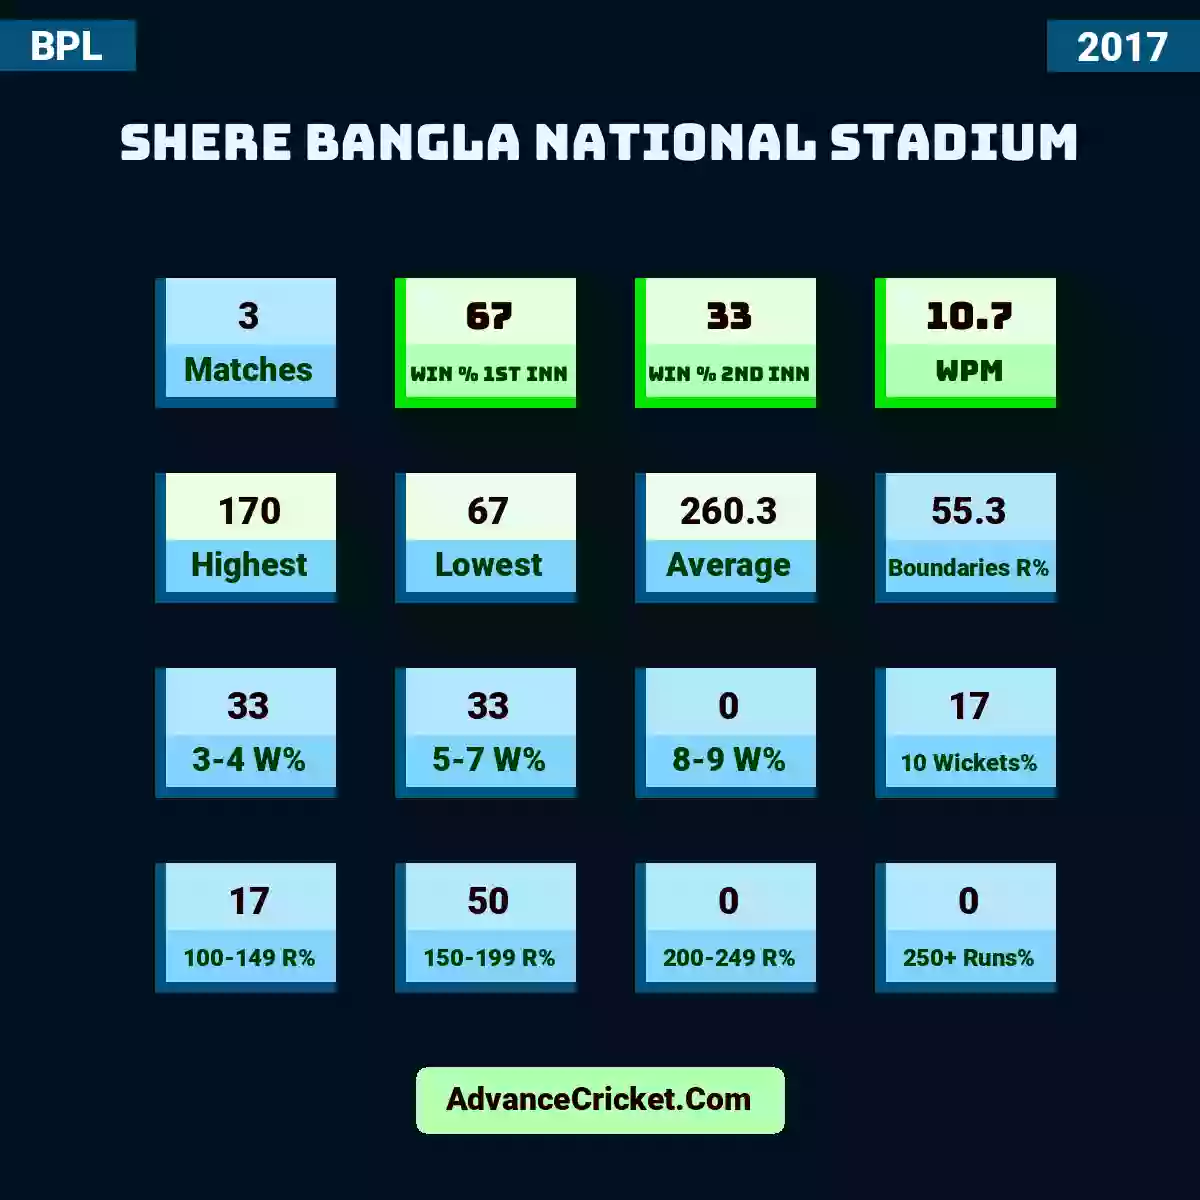 Image showing Shere Bangla National Stadium with Matches: 3, Win % 1st Inn: 67, Win % 2nd Inn: 33, WPM: 10.7, Highest: 170, Lowest: 67, Average: 260.3, Boundaries R%: 55.3, 3-4 W%: 33, 5-7 W%: 33, 8-9 W%: 0, 10 Wickets%: 17, 100-149 R%: 17, 150-199 R%: 50, 200-249 R%: 0, 250+ Runs%: 0.